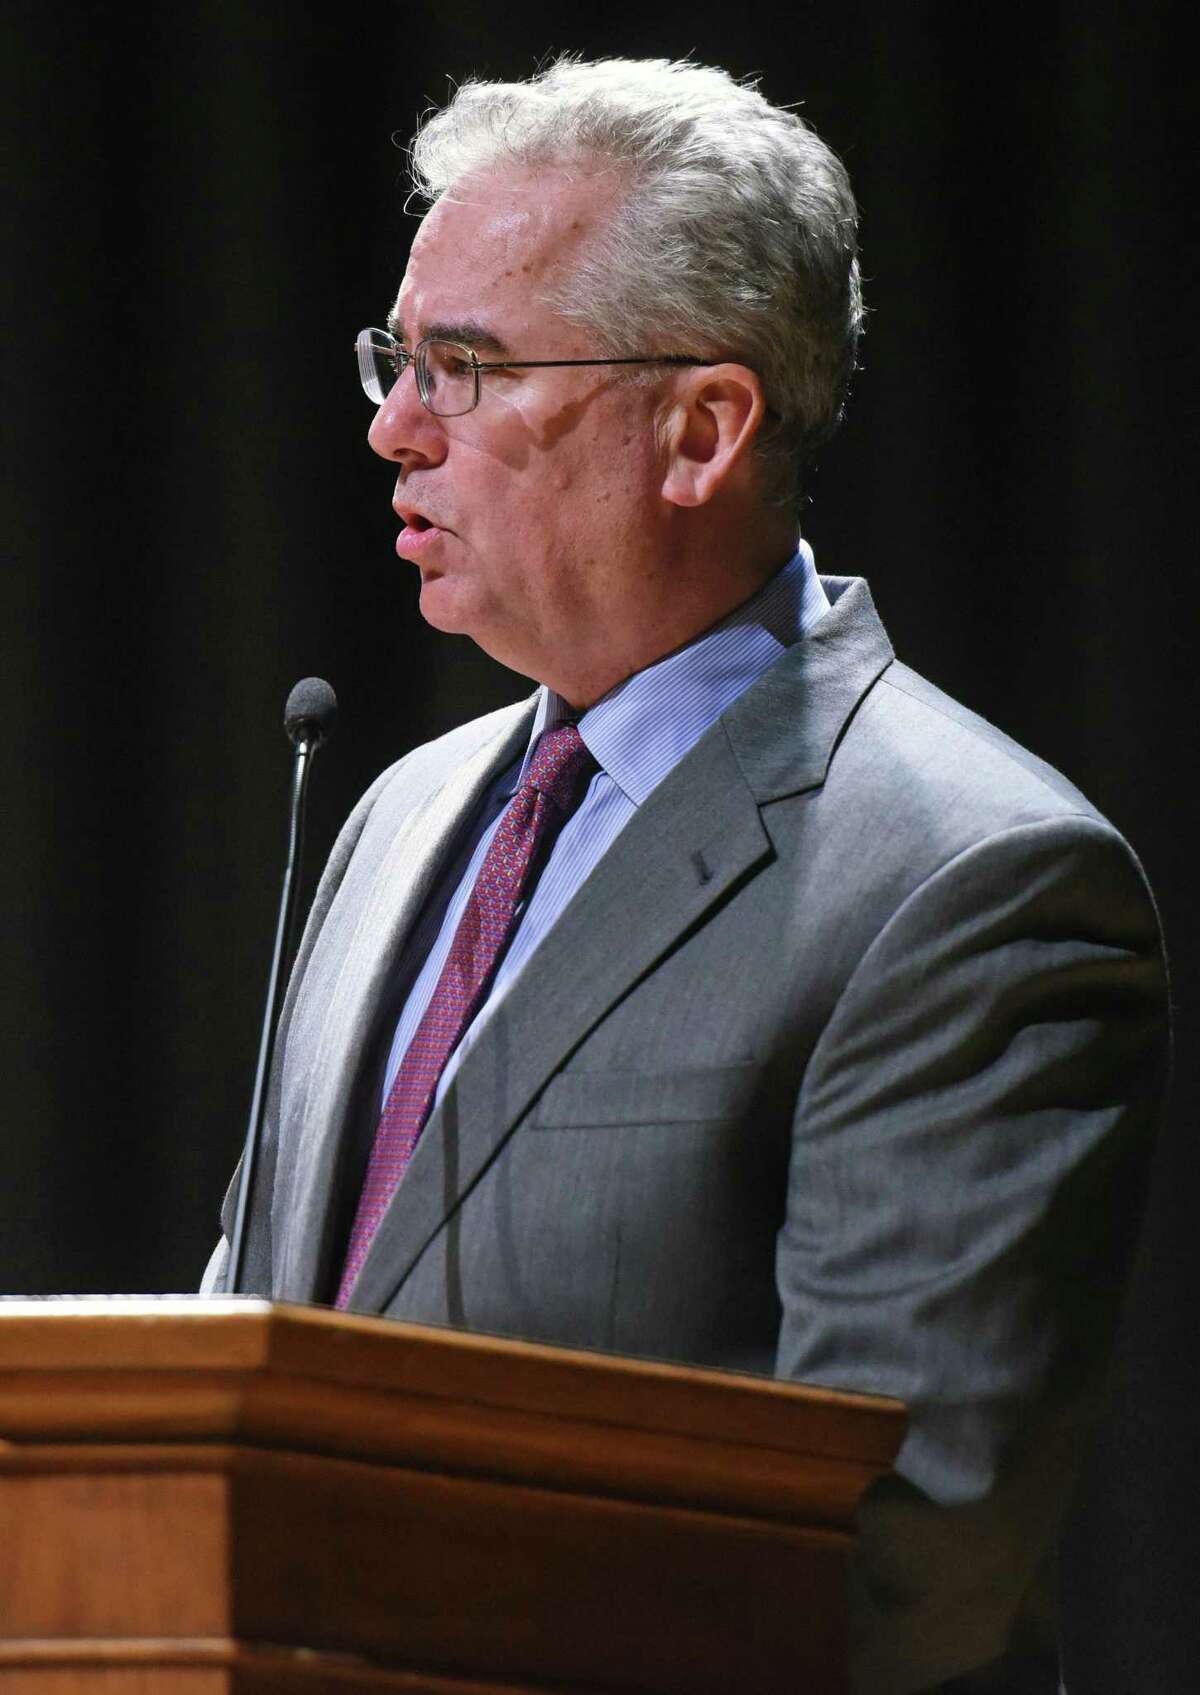 Moderator Thomas Byrne speaks during the Representative Town Meeting at Central Middle School in Greenwich, on April 13, 2015.